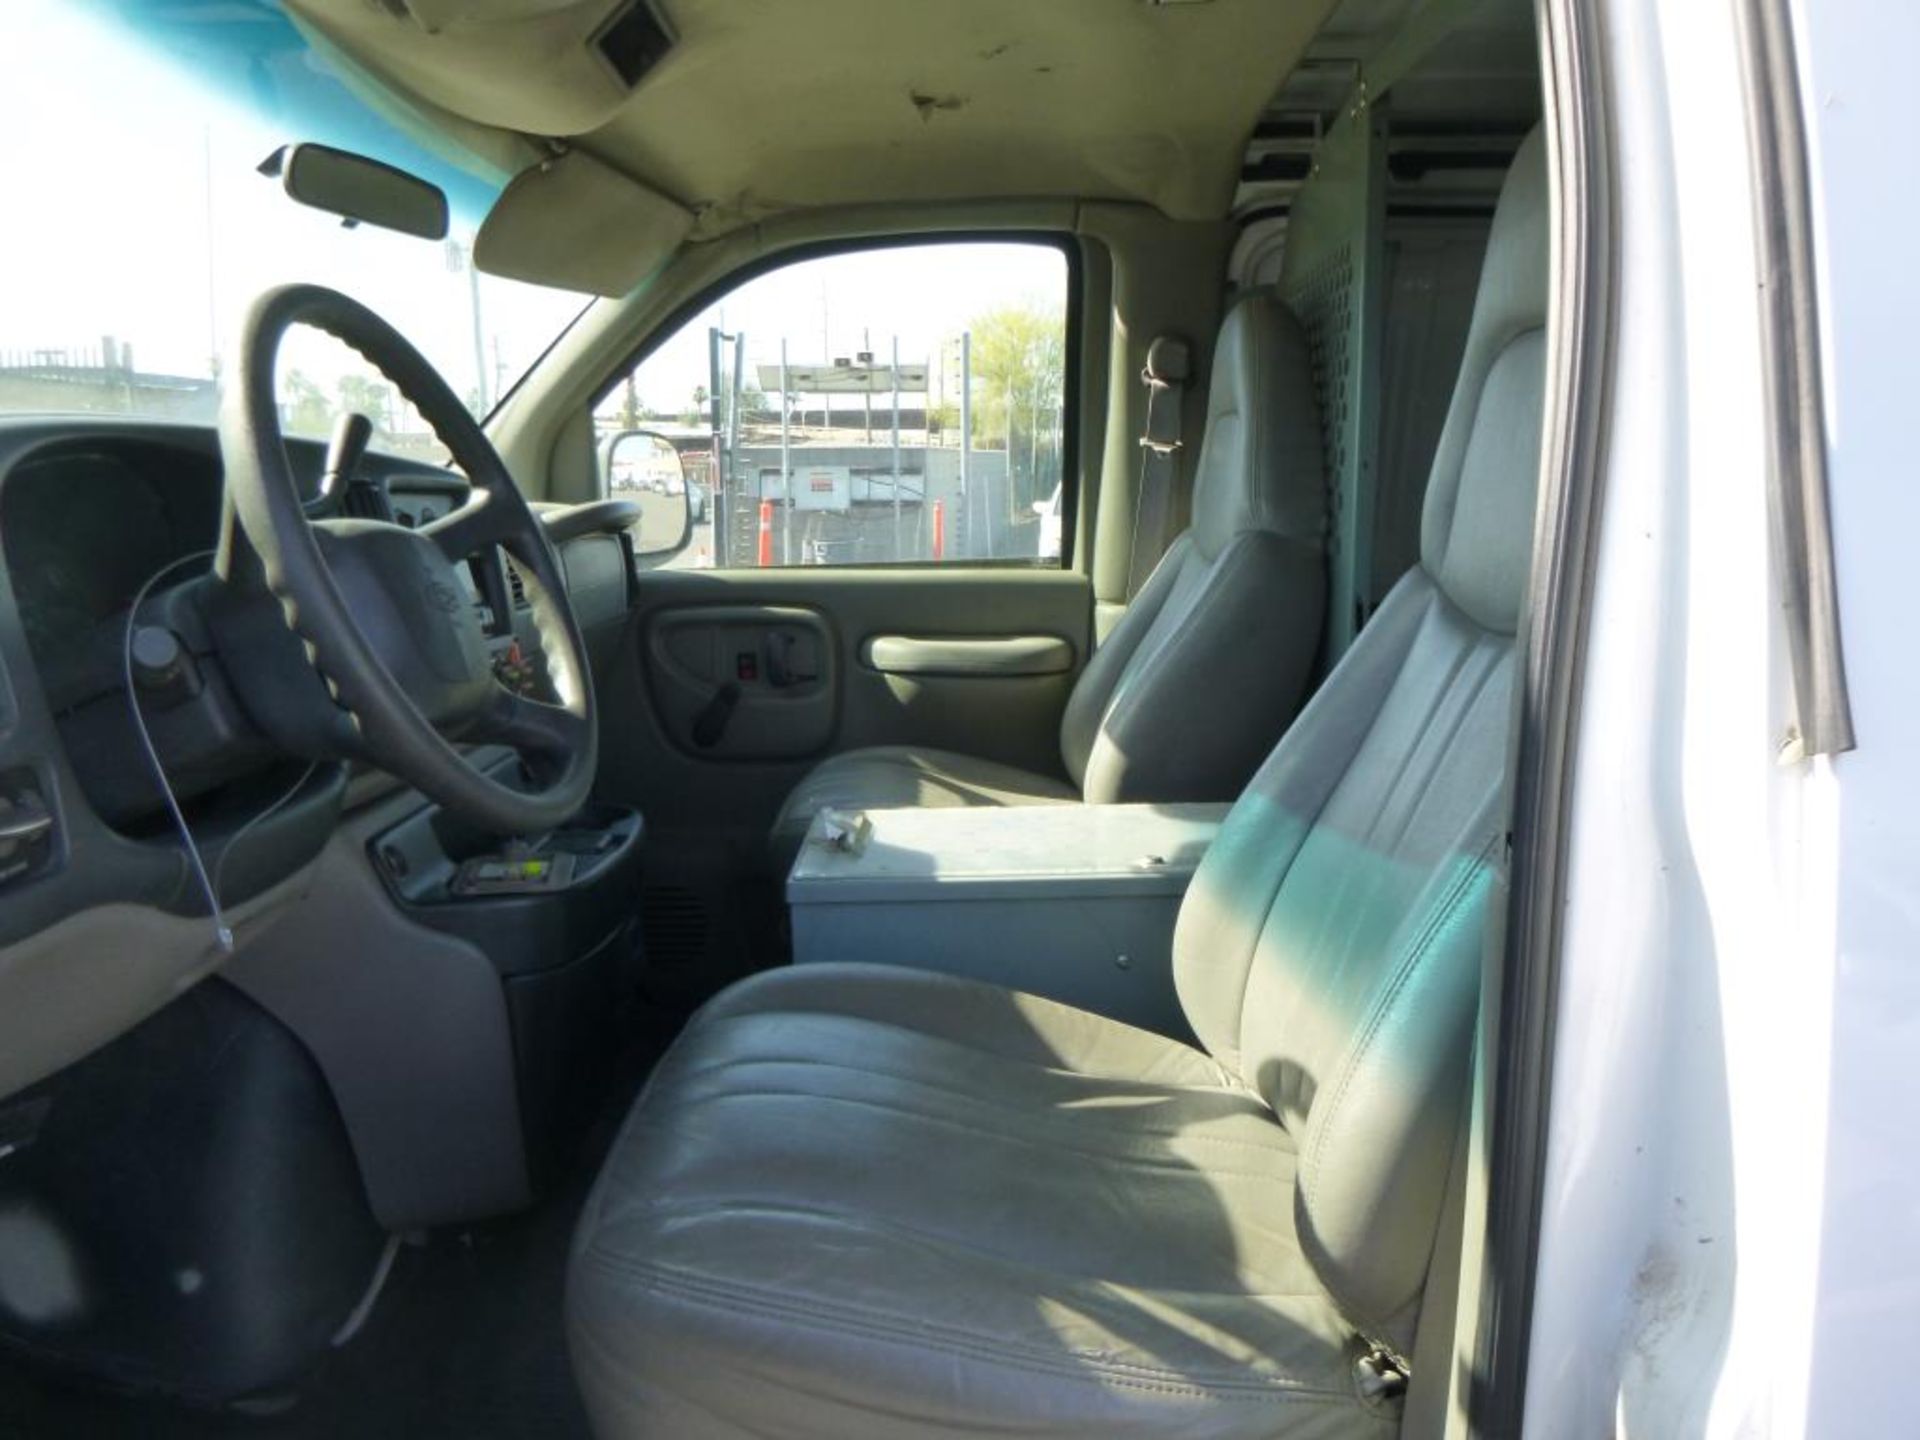 (Lot # 3452) 1999 Chevrolet Express G2500 - Image 11 of 14